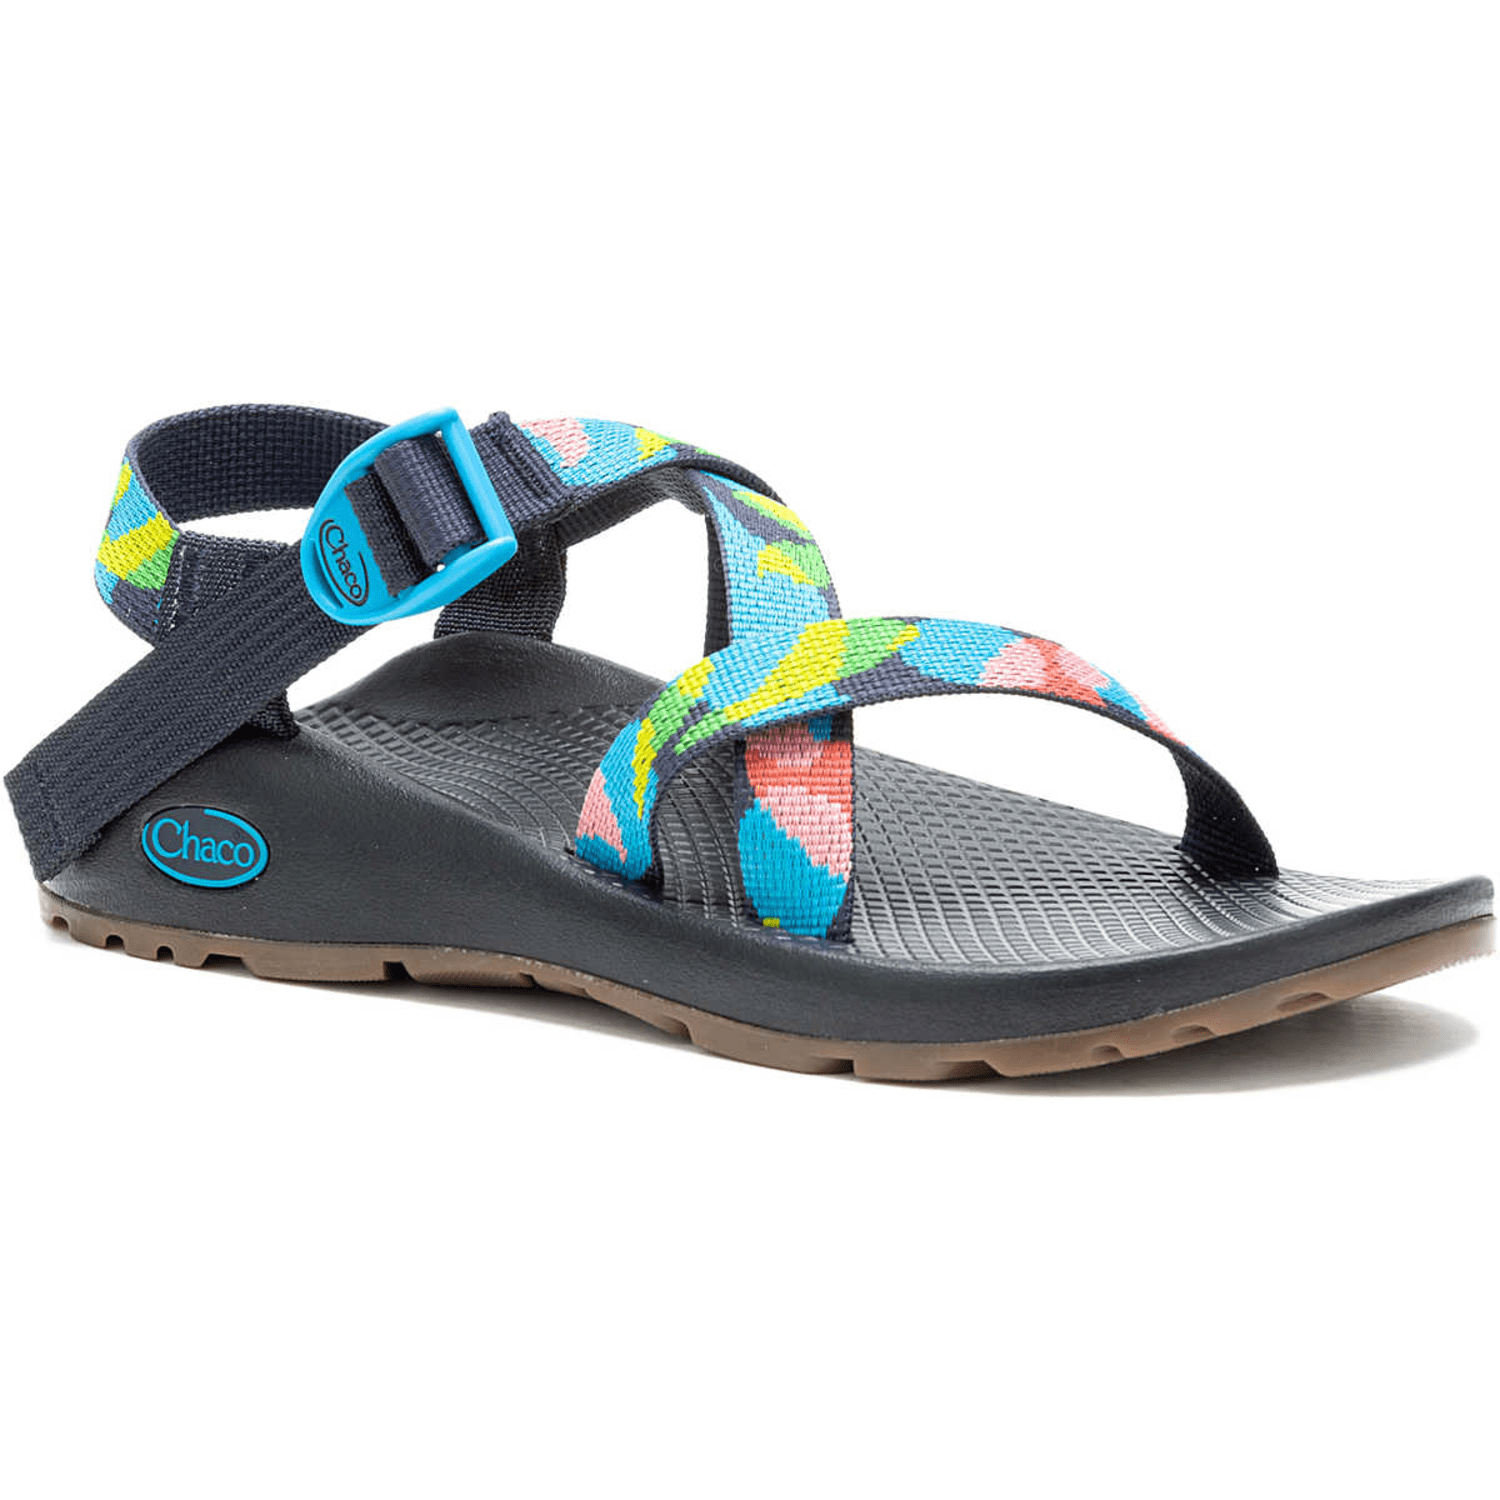 Chaco Z1 Classic Women's Sport Sandals, Shade Sorbet, W9